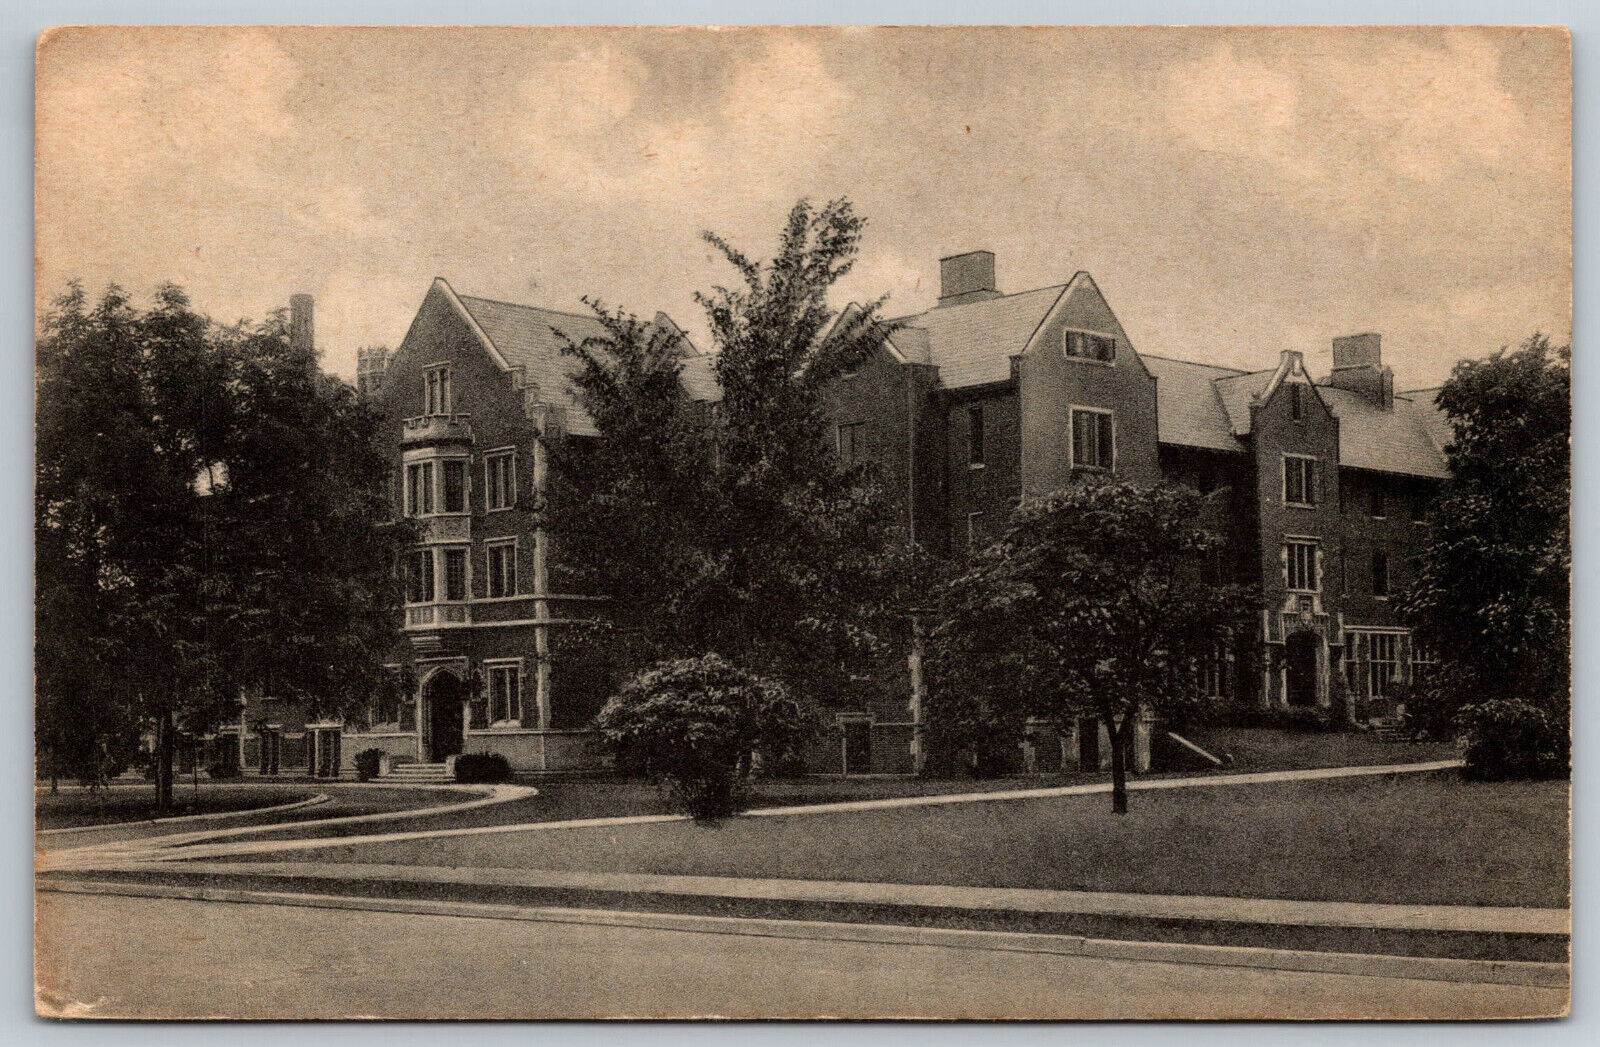 Postcard Lucina Hall Womens Dormitory Ball State Teachers College Muncie, IN C19